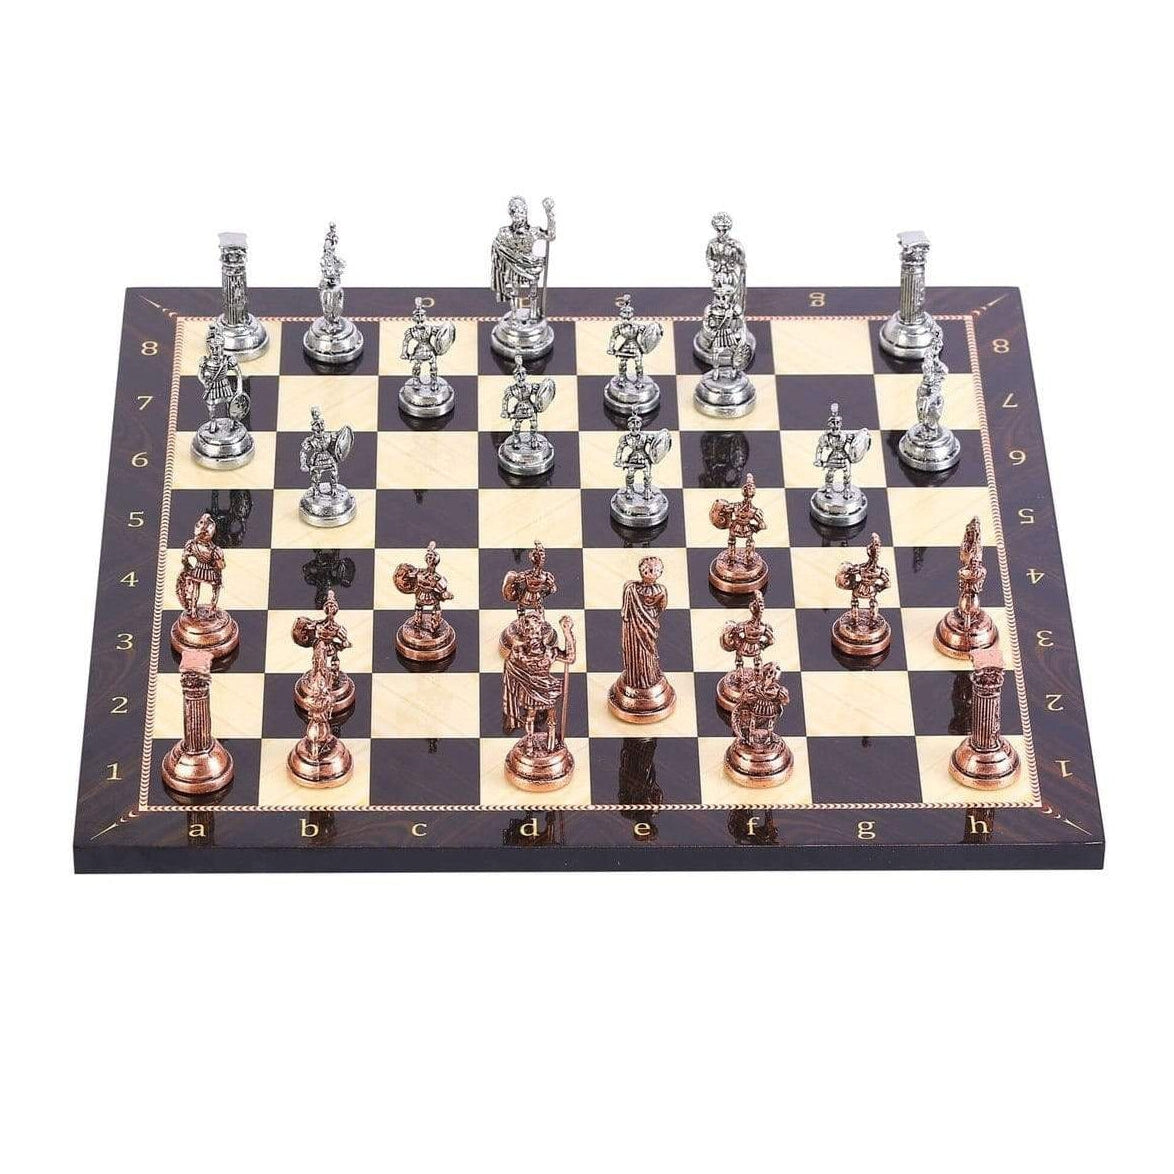 Copper Roman Figures With Compact Stylish Chess Board | whatagift.com.au.